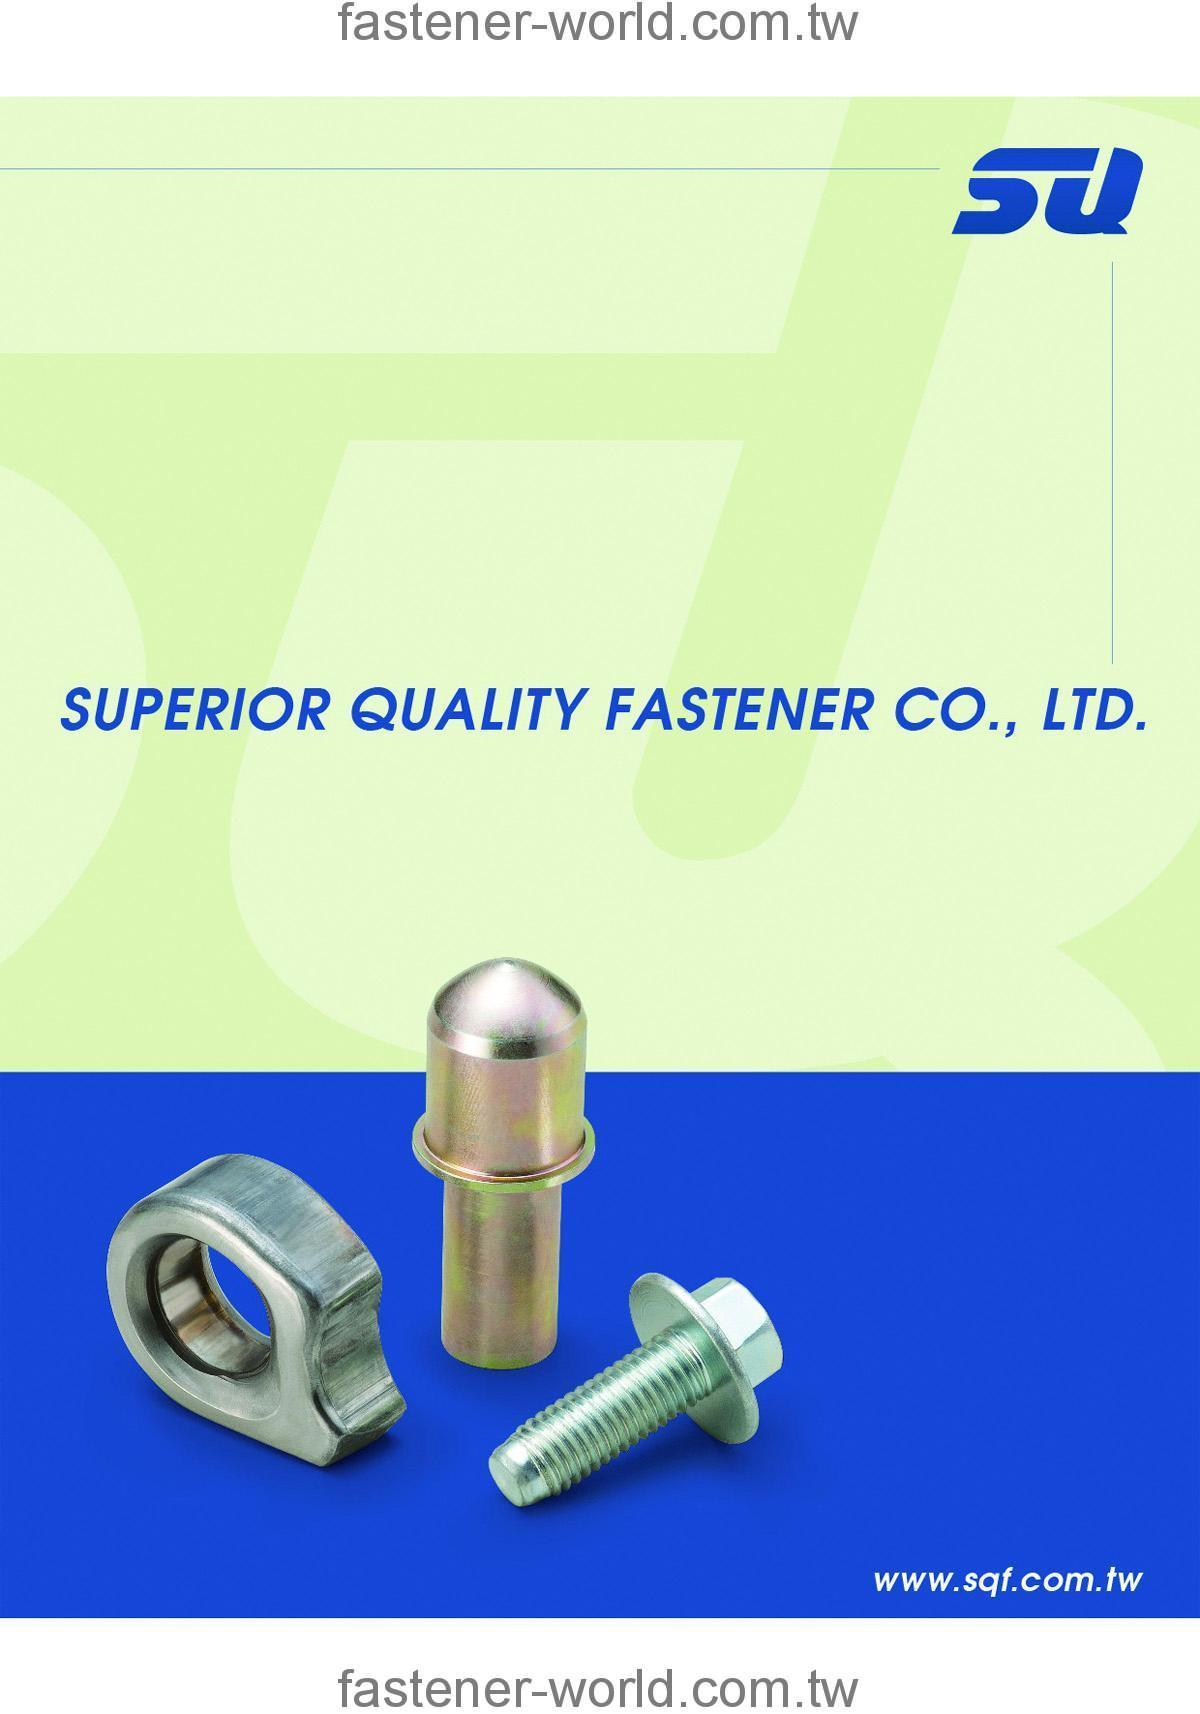 SUPERIOR QUALITY FASTENER CO., LTD.  Online Catalogues